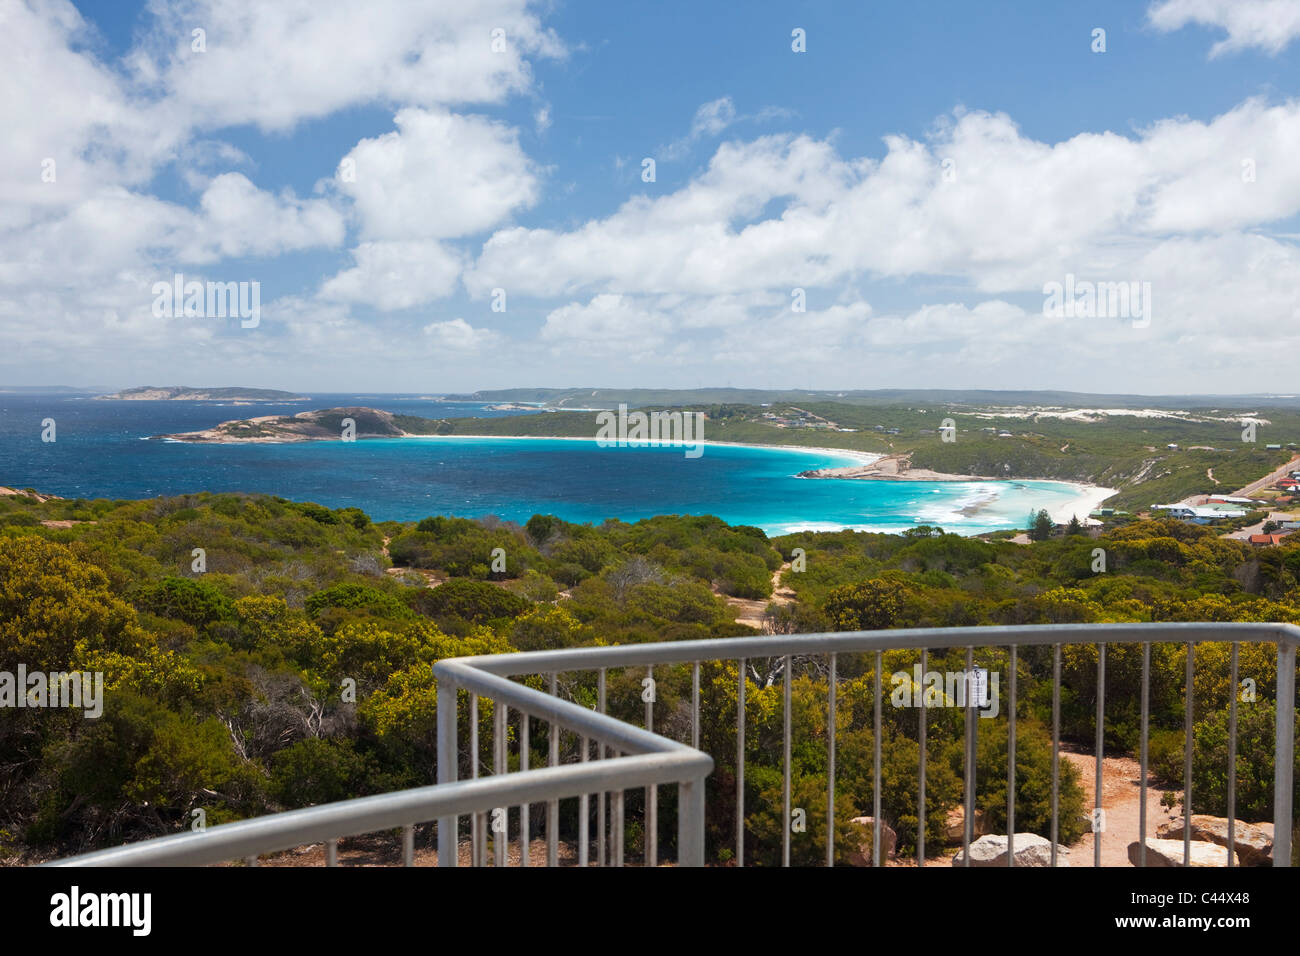 View of West Beach from Rotary Lookout at Wireless Hill. Esperance, Western Australia, Australia Stock Photo